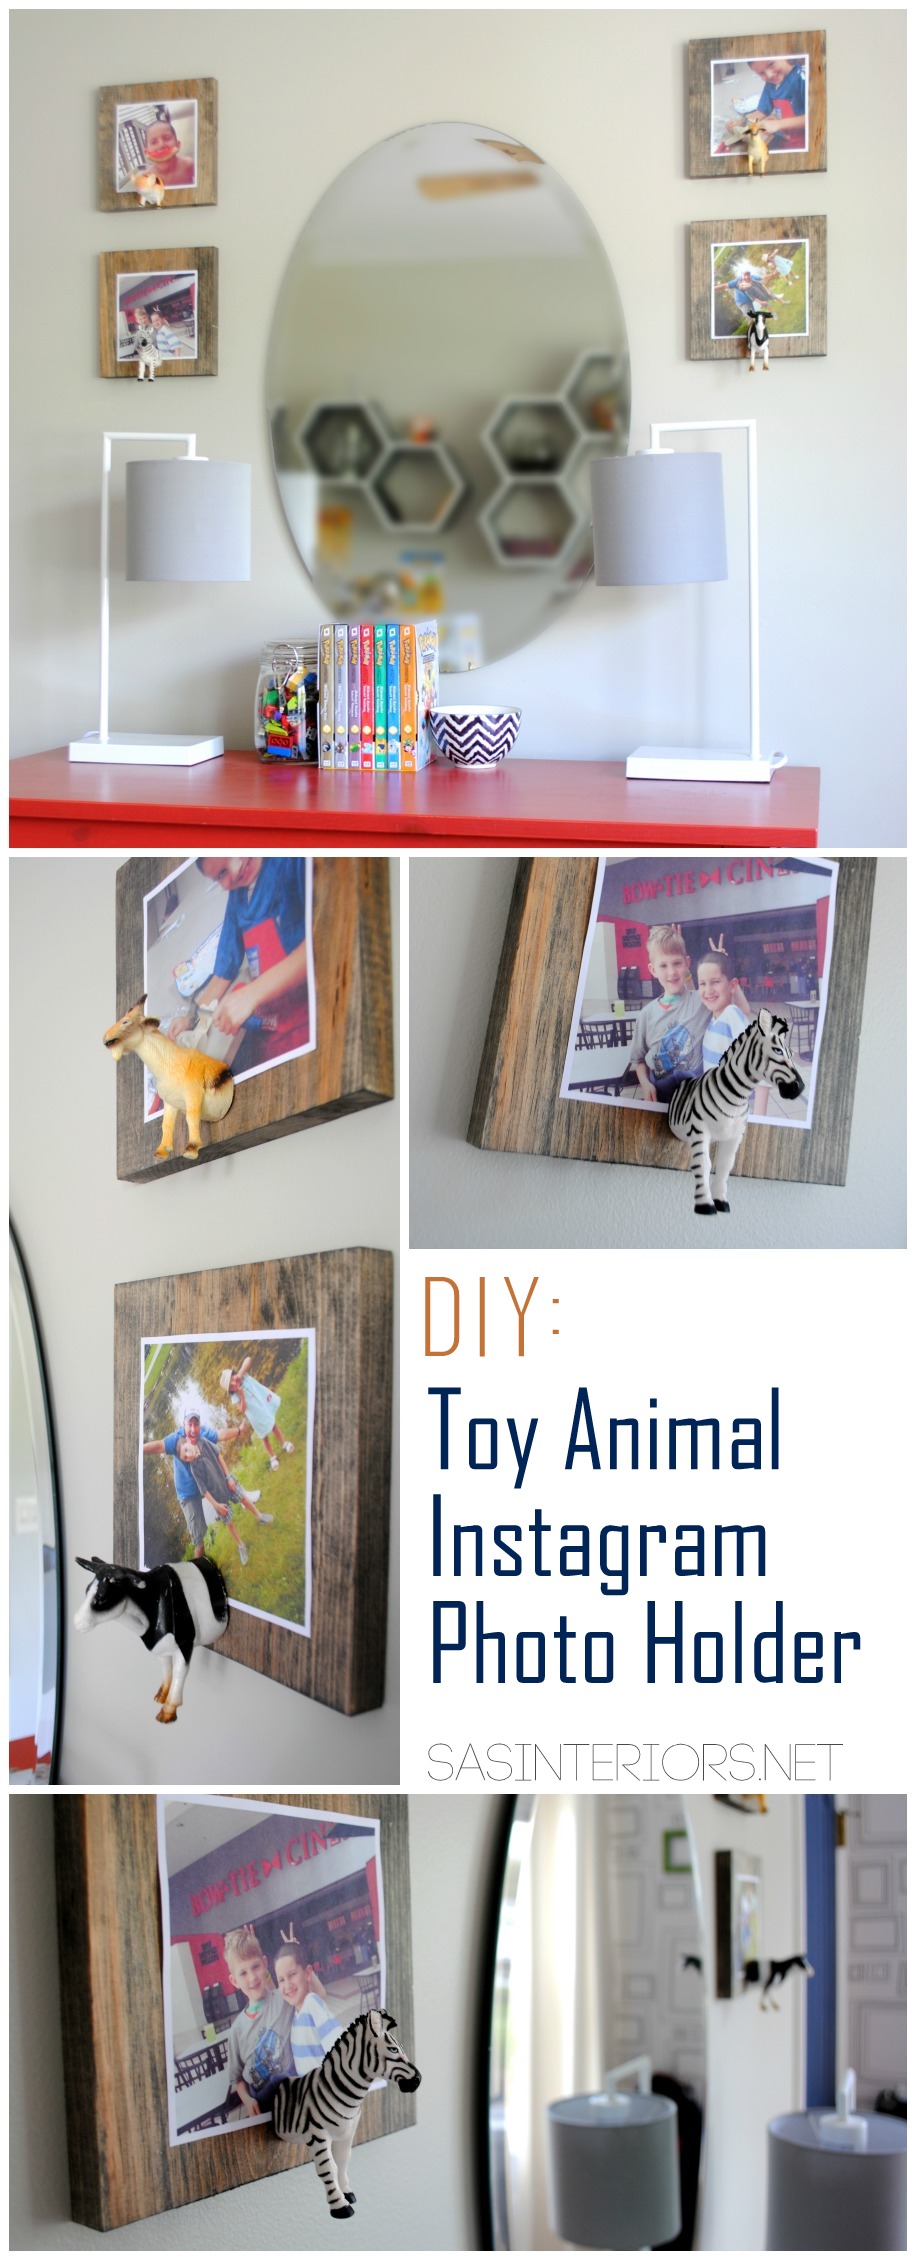 DIY: Toy Animal Instagram Photo Holder. So cute & easy to make. Perfect for a kids room or any eclectic space! Full tutorial at www.jennaburger.com